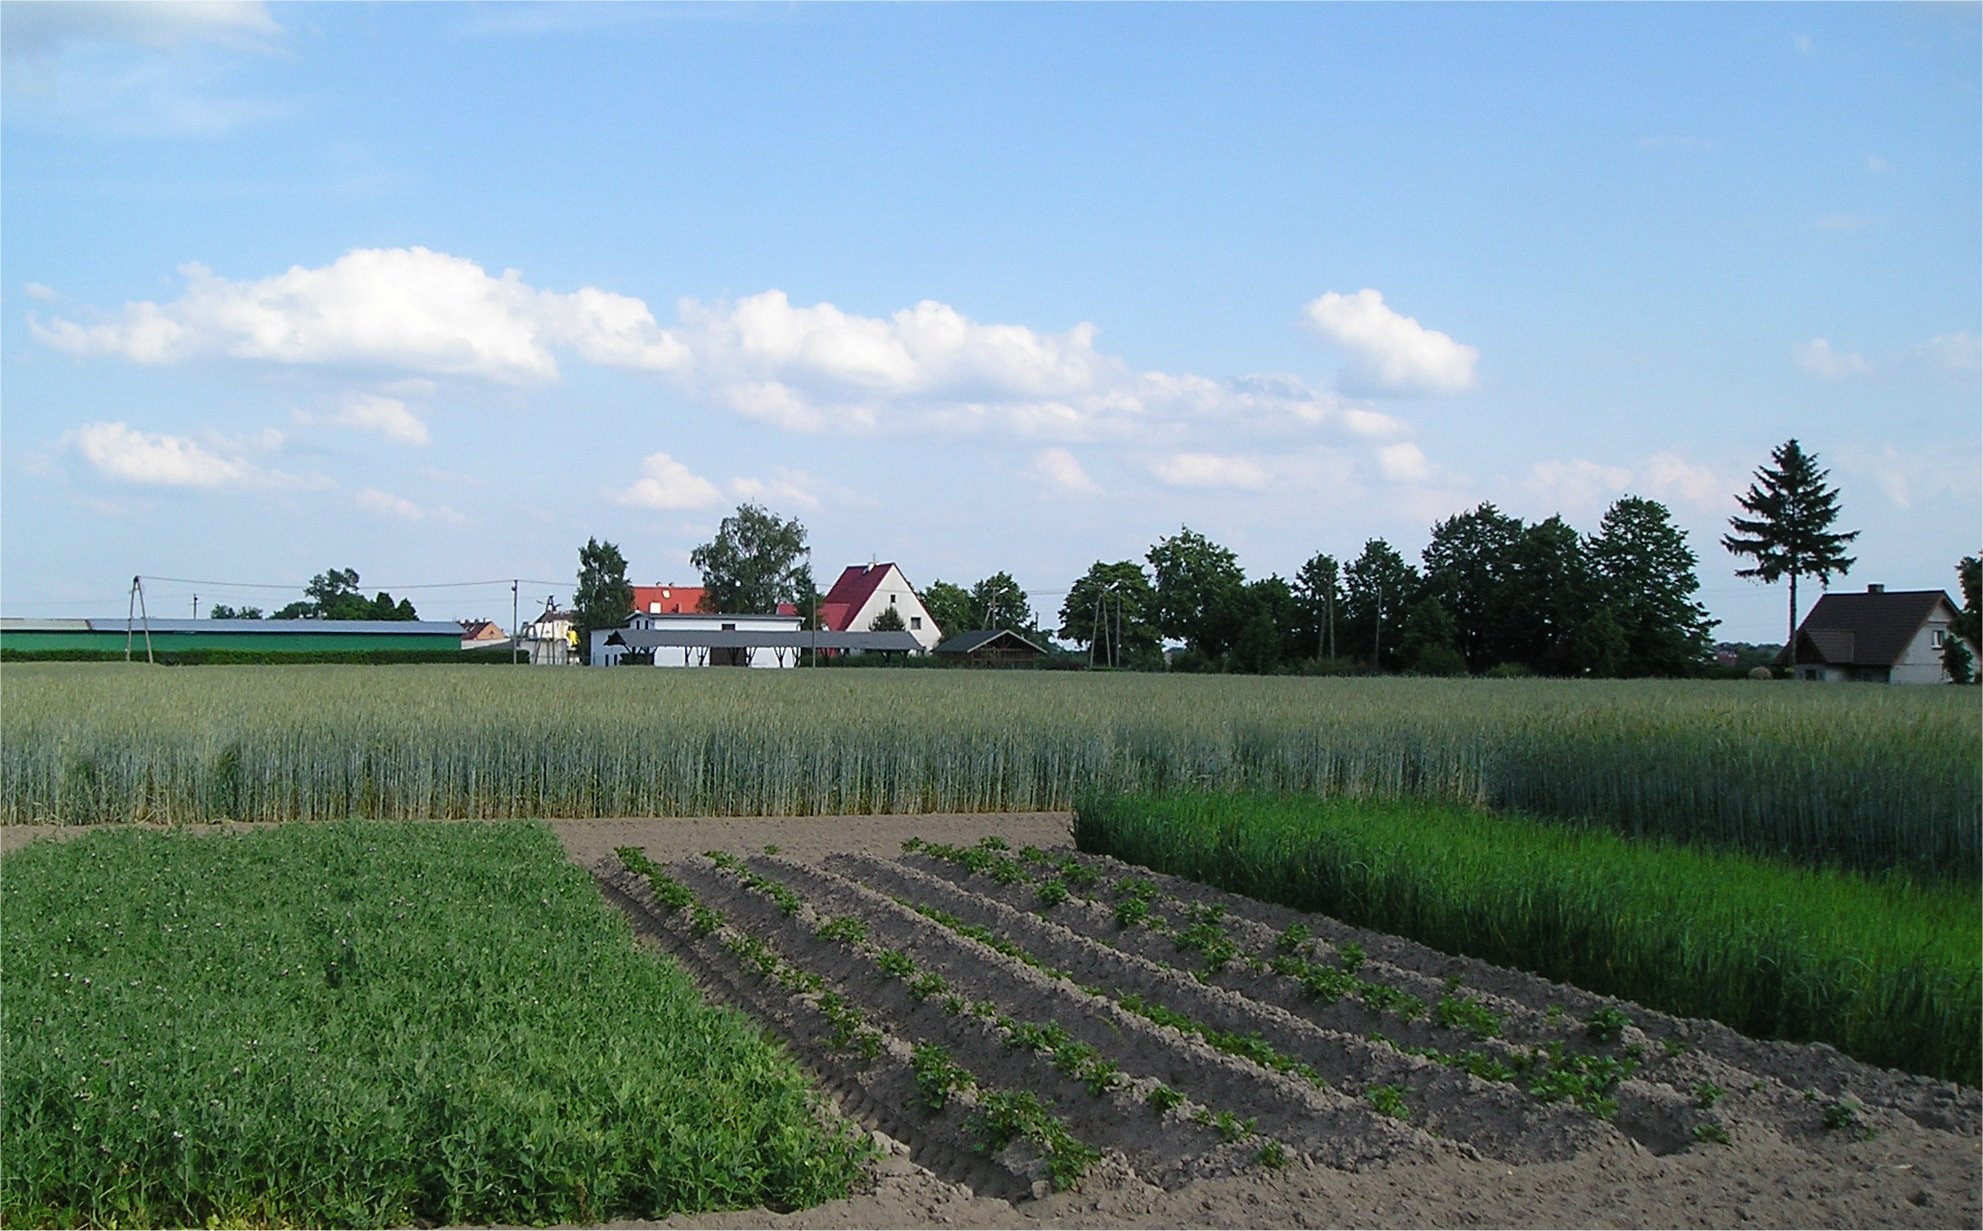 Example of fields in different crop rotation cycles: Different crops on one farm as part of crop rotations. In the front field, the "Norfolk" crop rotation sequence (potatoes, oats, peas, rye) is being applied; in the back field, rye has been grown for 58 years in a row.